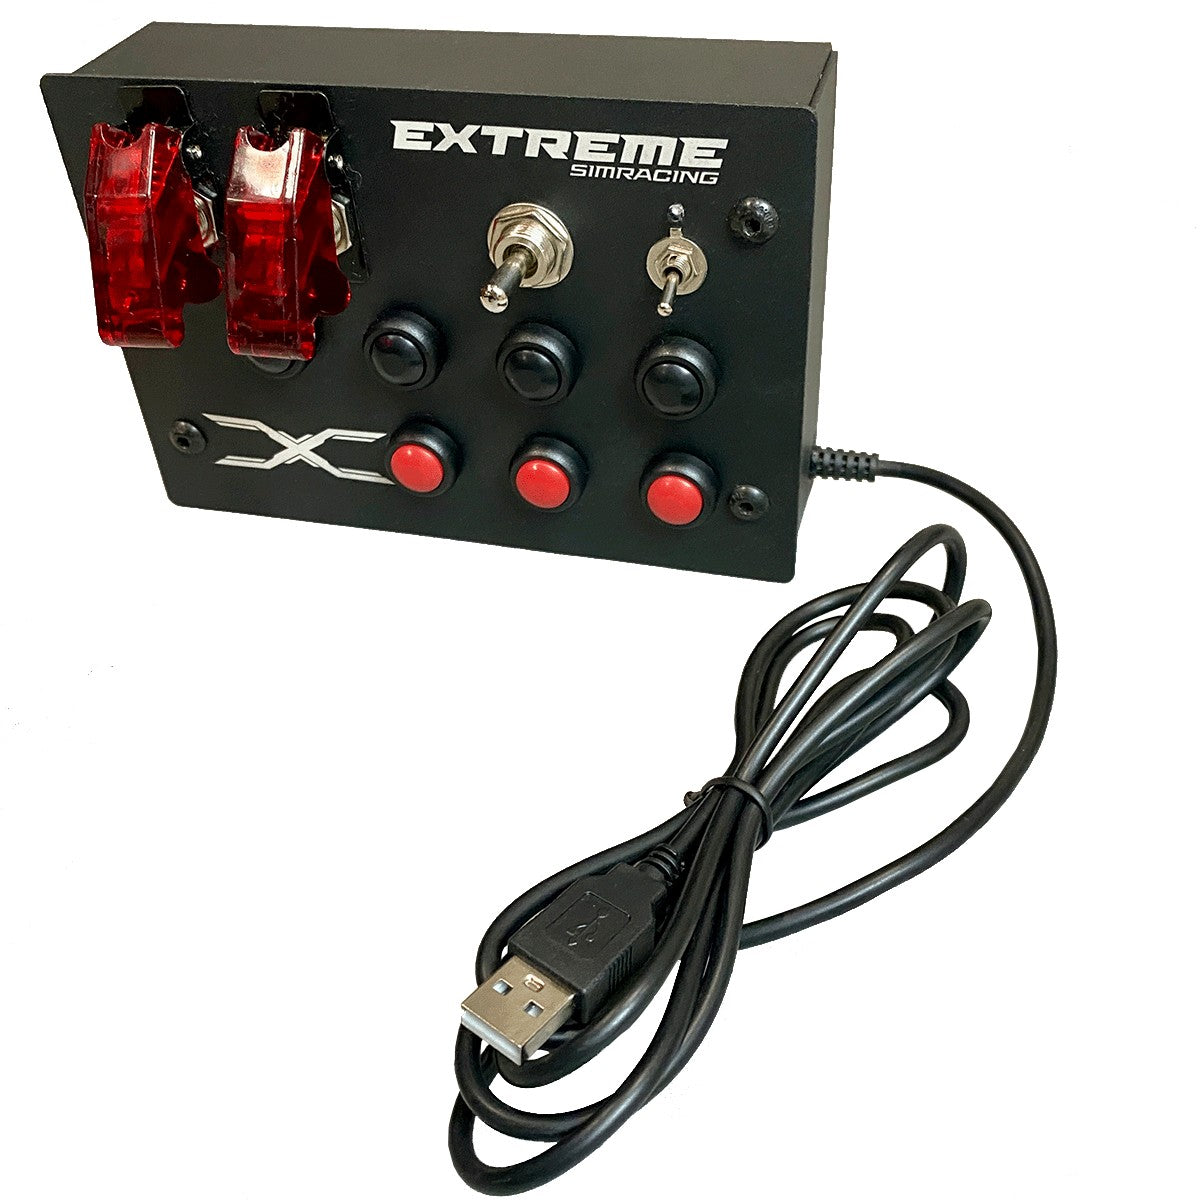 BUTTON BOX EXTREME SIMRACING (MOUNT BRACKET INCLUDED) – Extreme